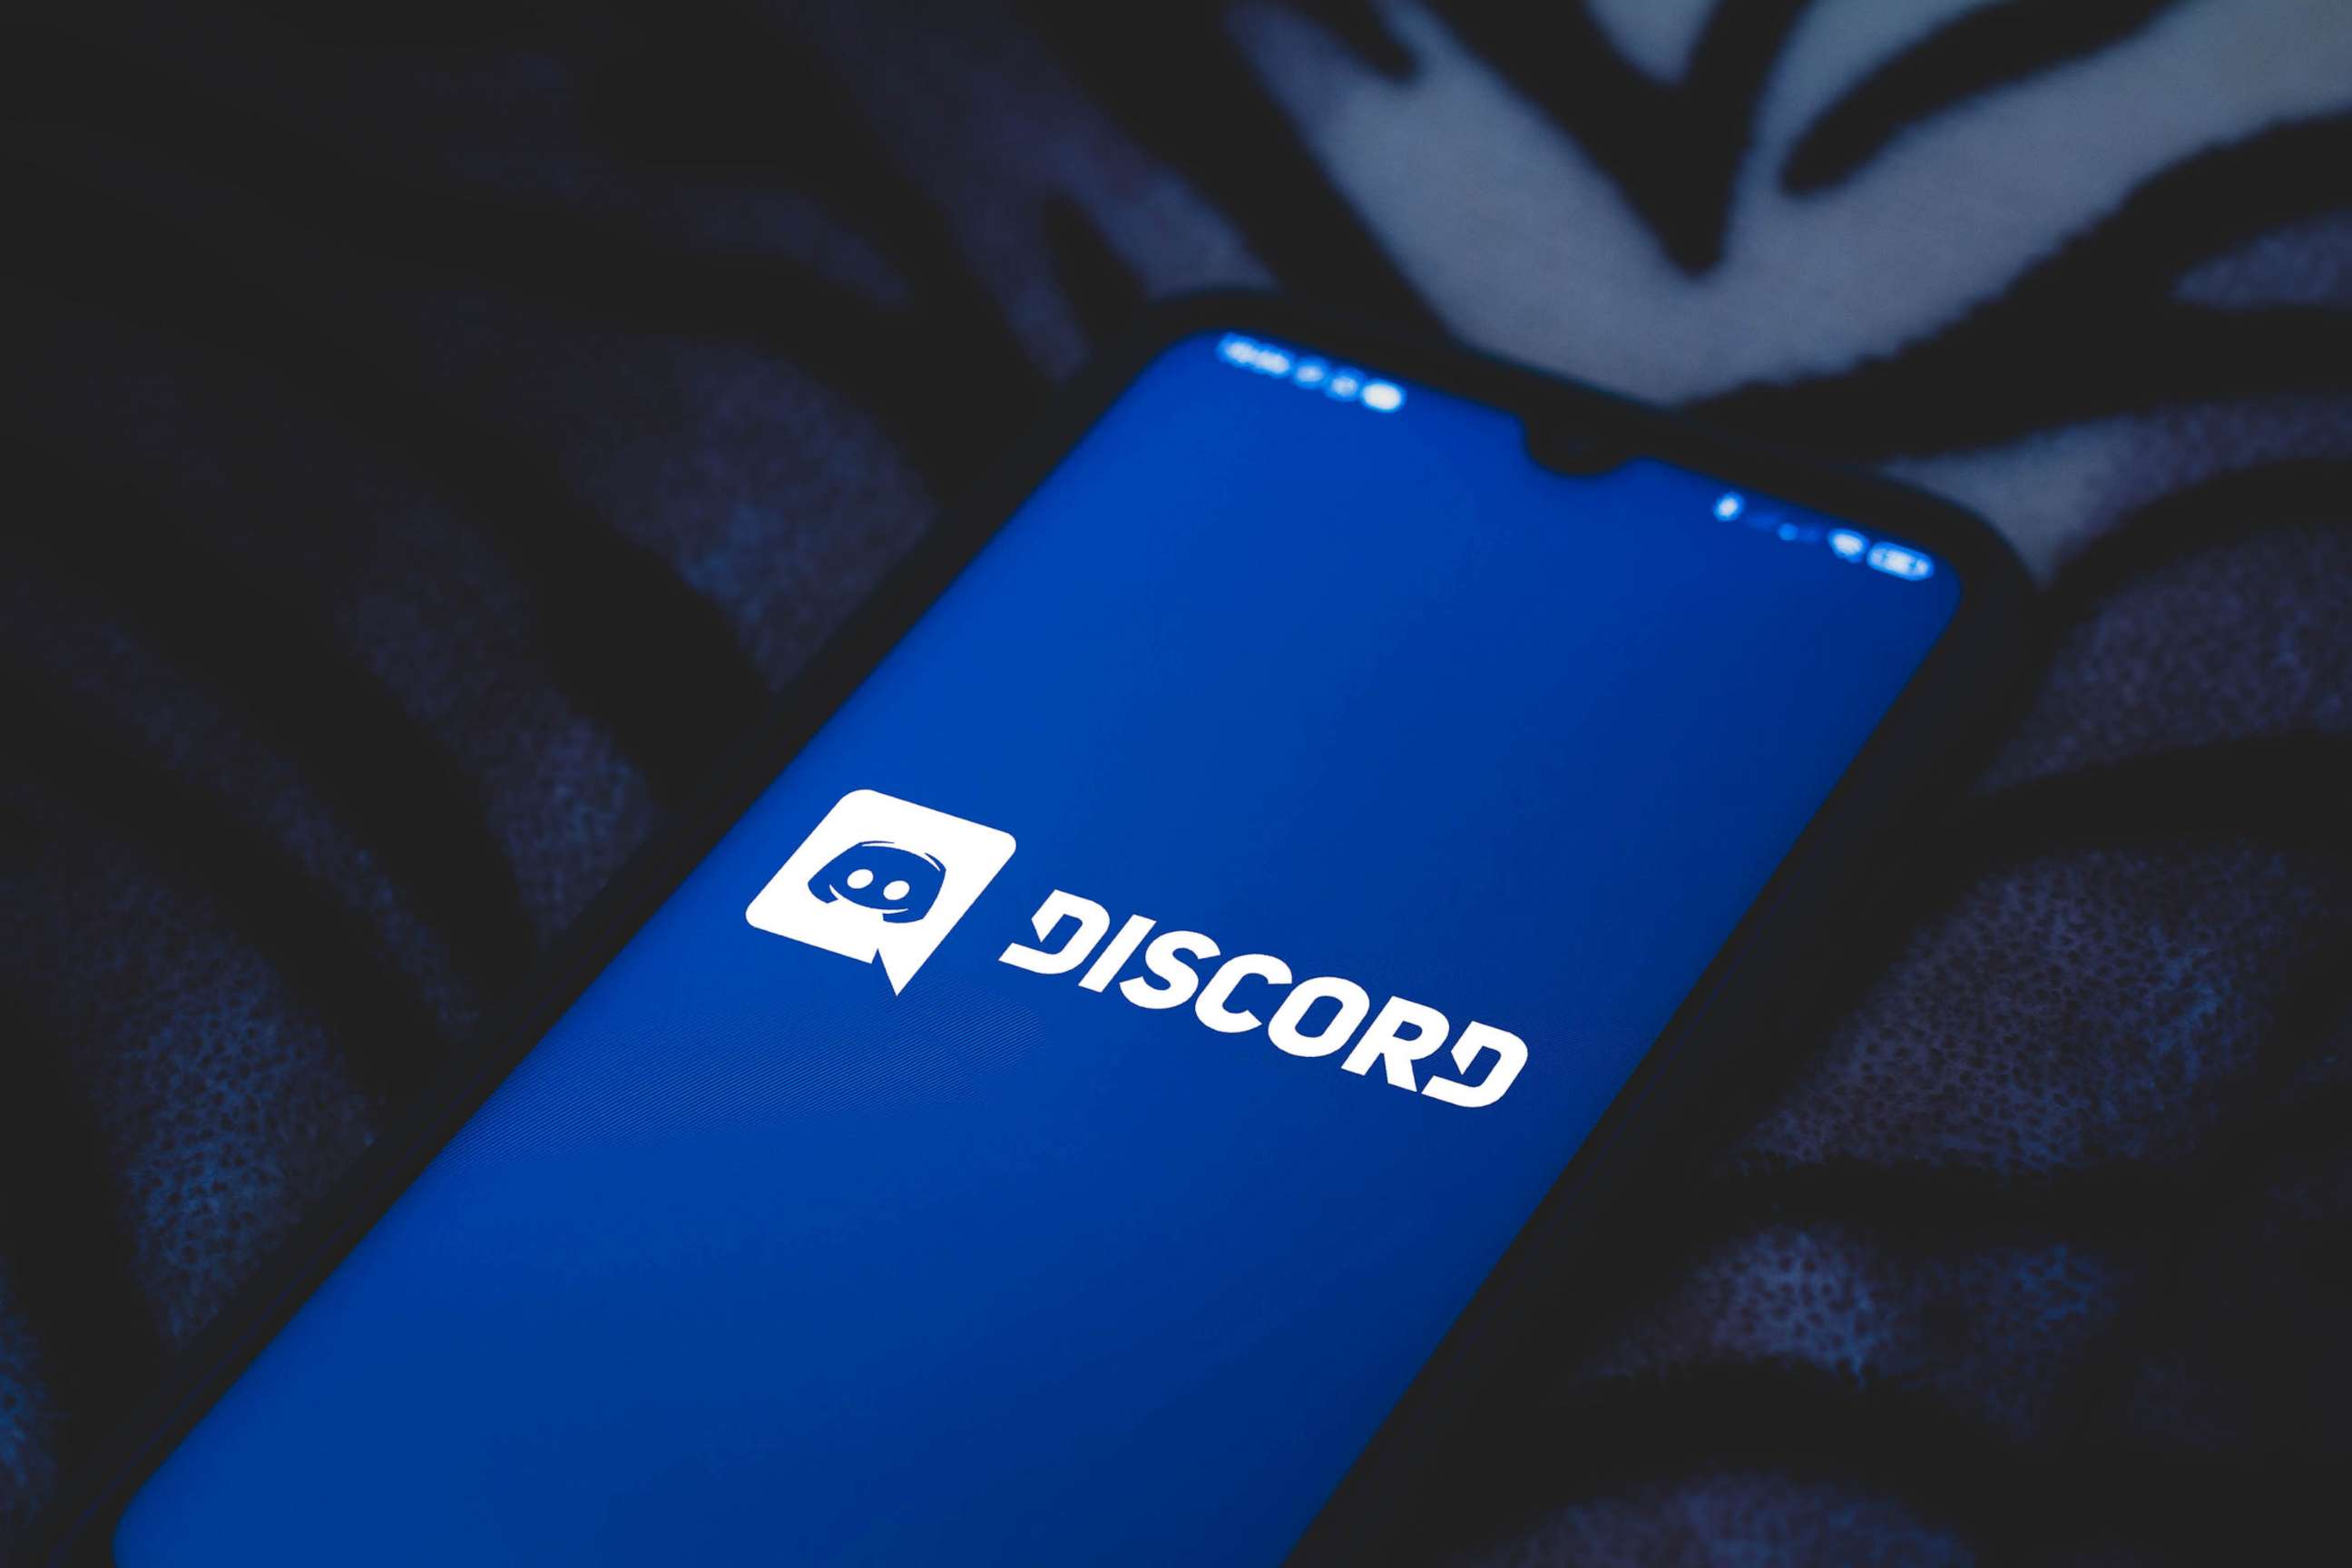 PHOTO: In this March 24, 2021, file photo, the Discord logo is displayed on a smartphone.